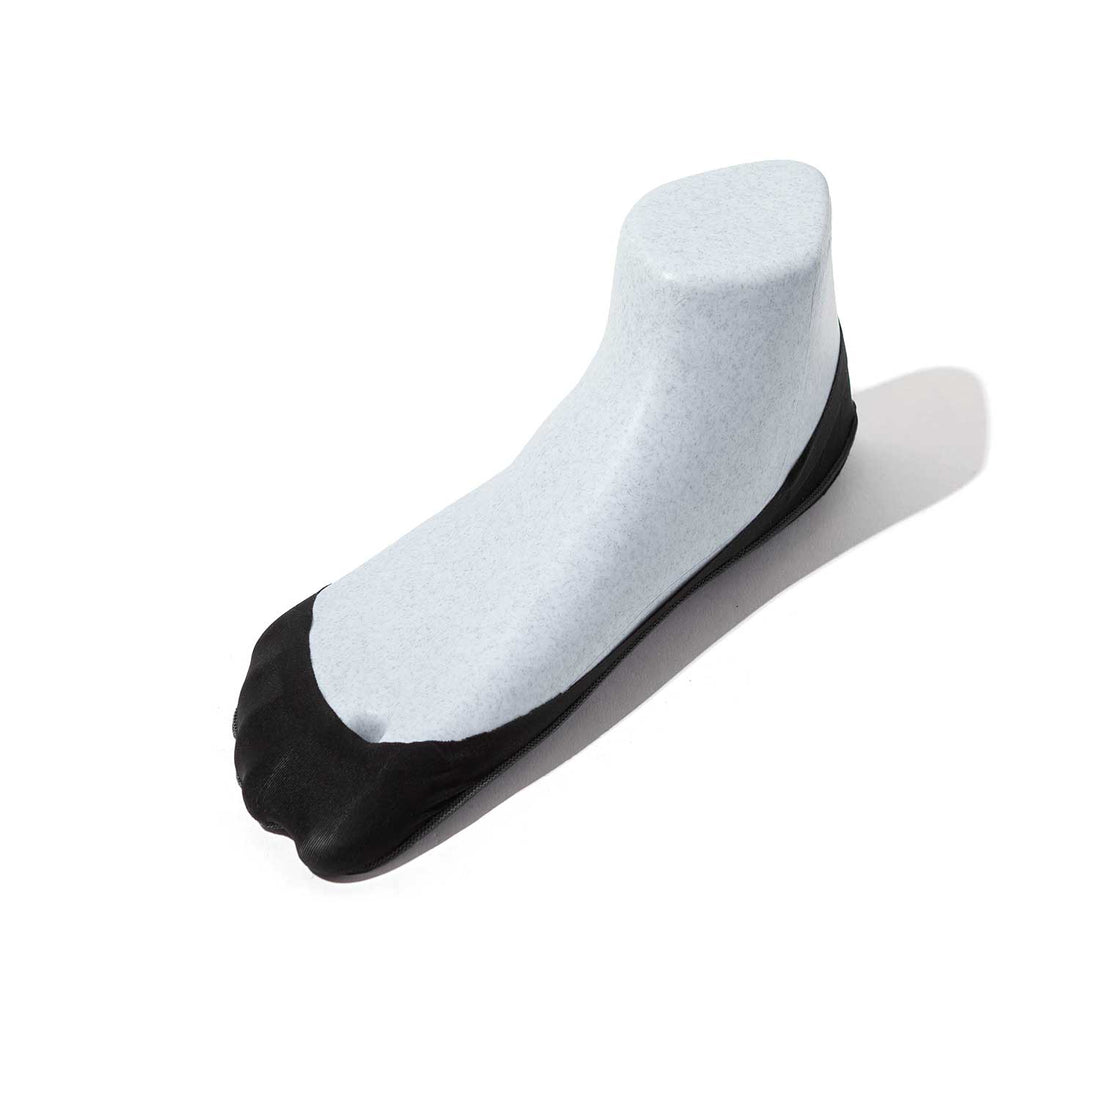 Unisex No Show Socks - Low Cut Casual Cotton Socks - Multiple Sizes and  Colors - Non-Slide Socks